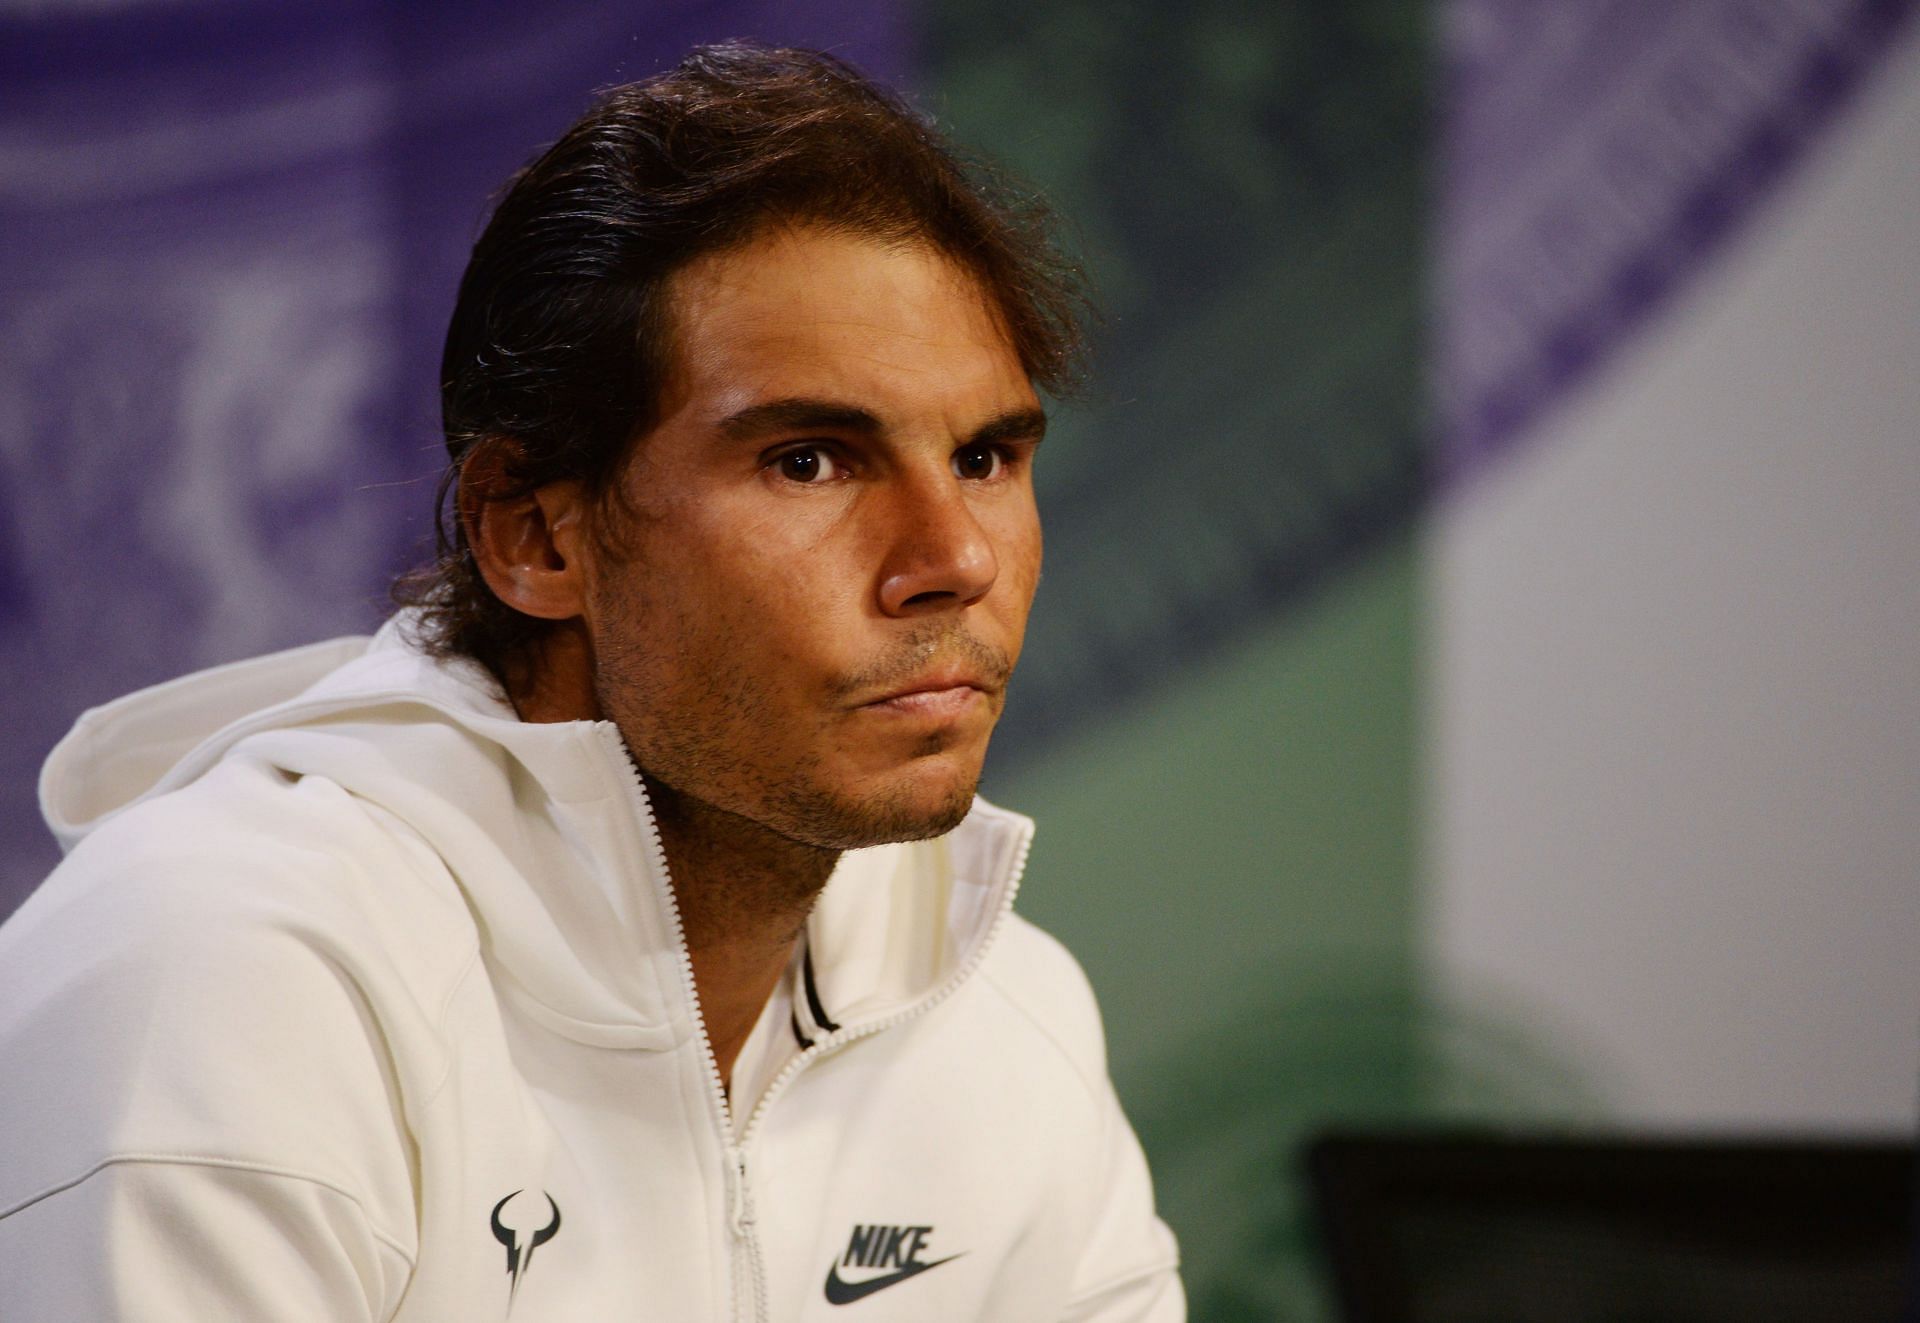 Rafael Nadal will fight for a semifinal spot on Wednesday